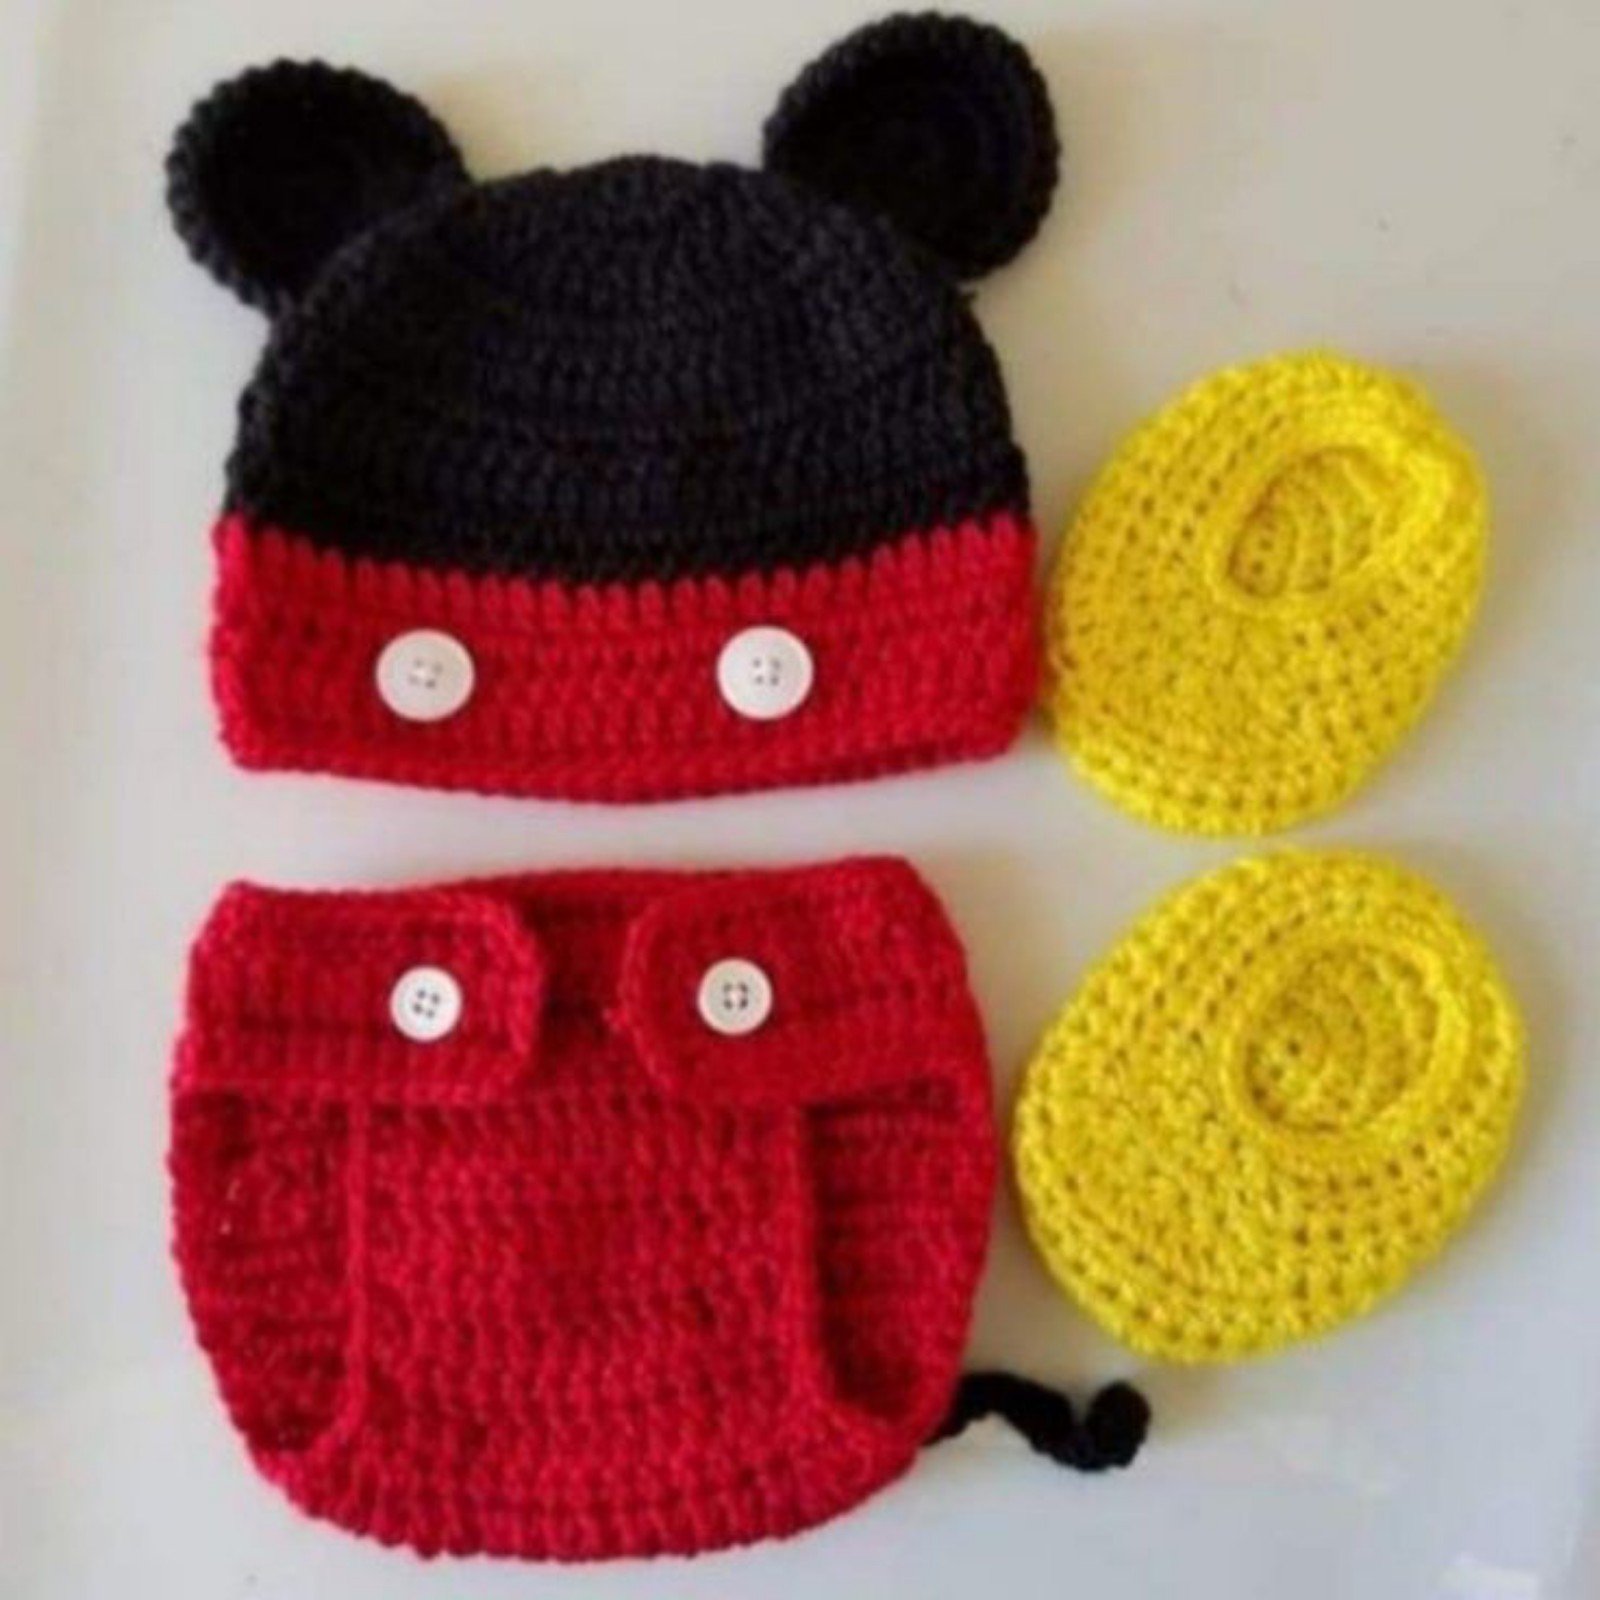 Crochet Baby Boy Mickey Mouse Inspired Outfit Photo Prop jaCb8gncn